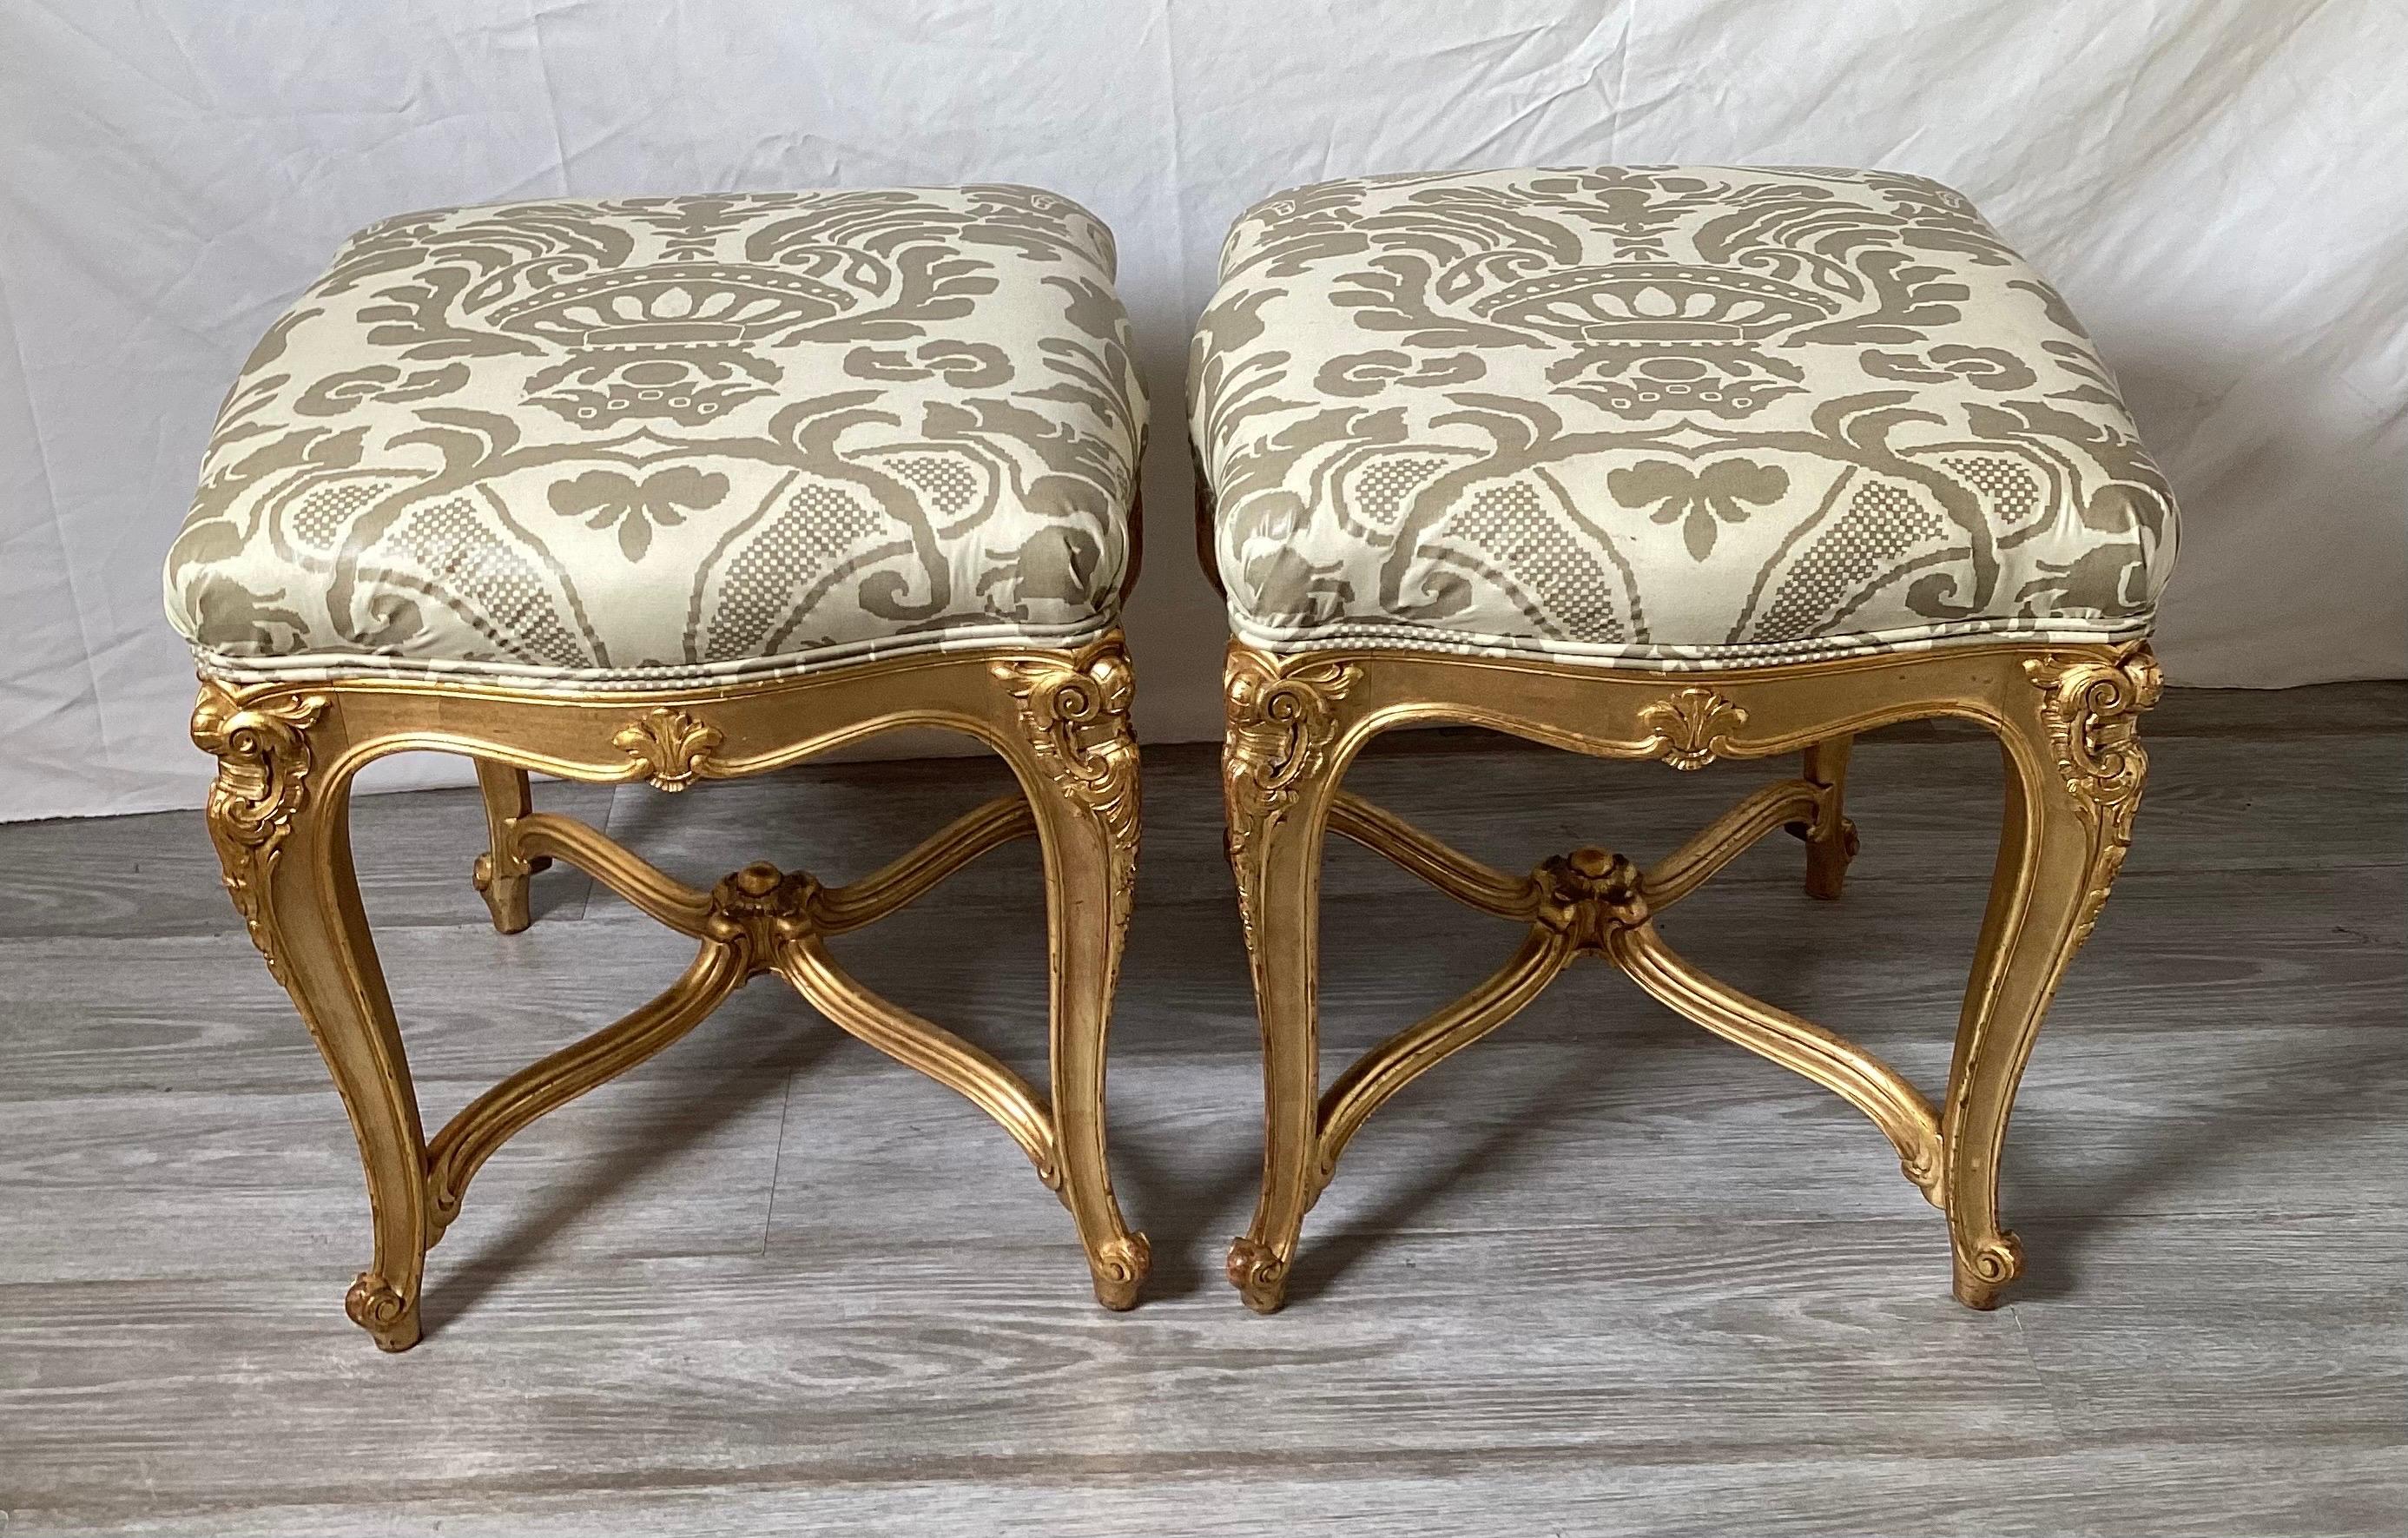 An Elegant pair of hand carved gilt wood square benches with new fabric. The real gold leaf frames with hand carved details with an X stretcher base. The new upholstery is vintage Fornisetti style champagne and taupe damask print.